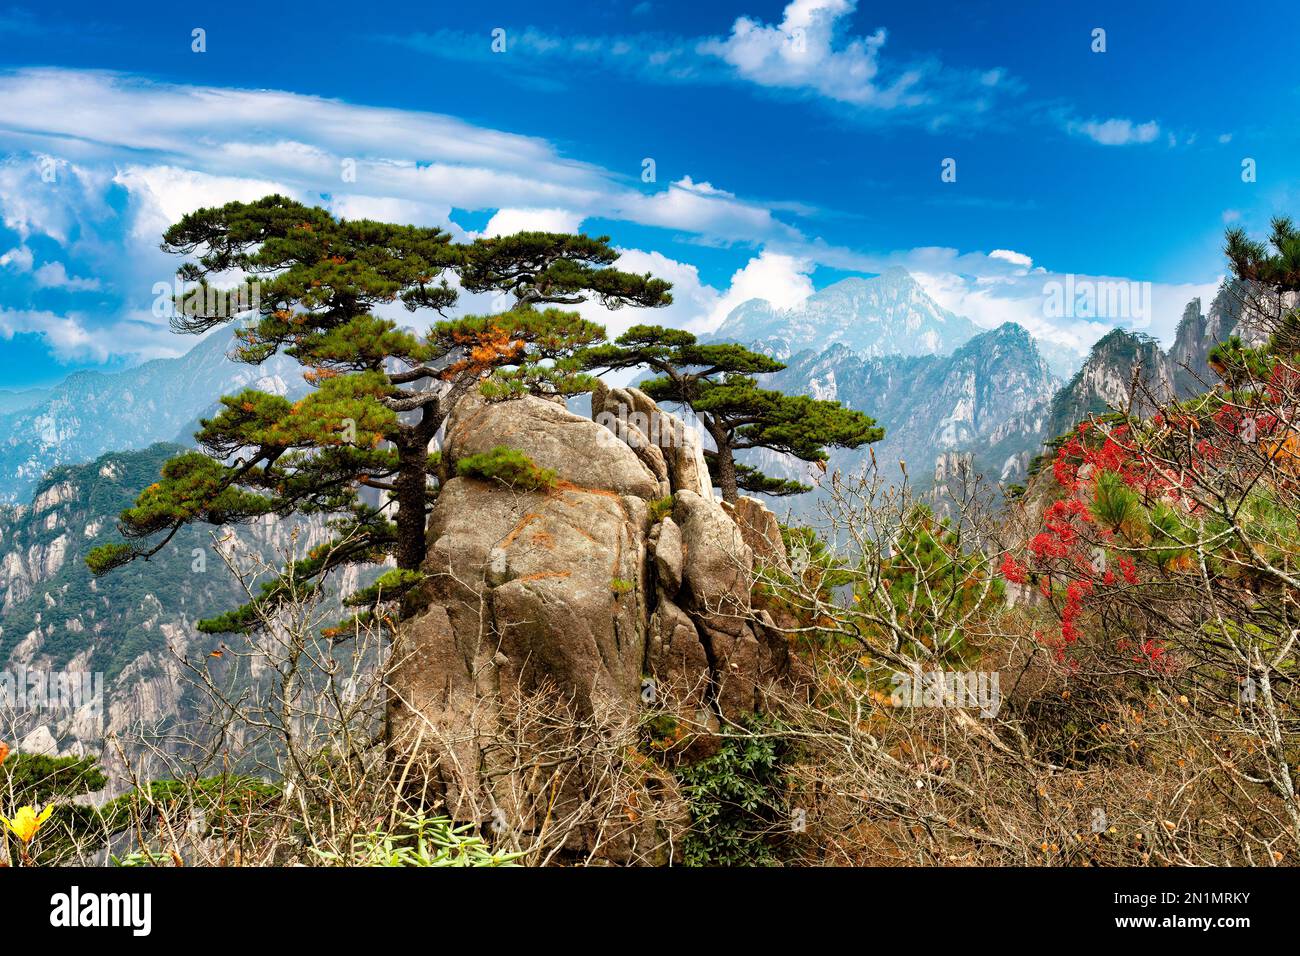 Mountain view with bonsai shaped trees and large standing rocks during nice day Stock Photo